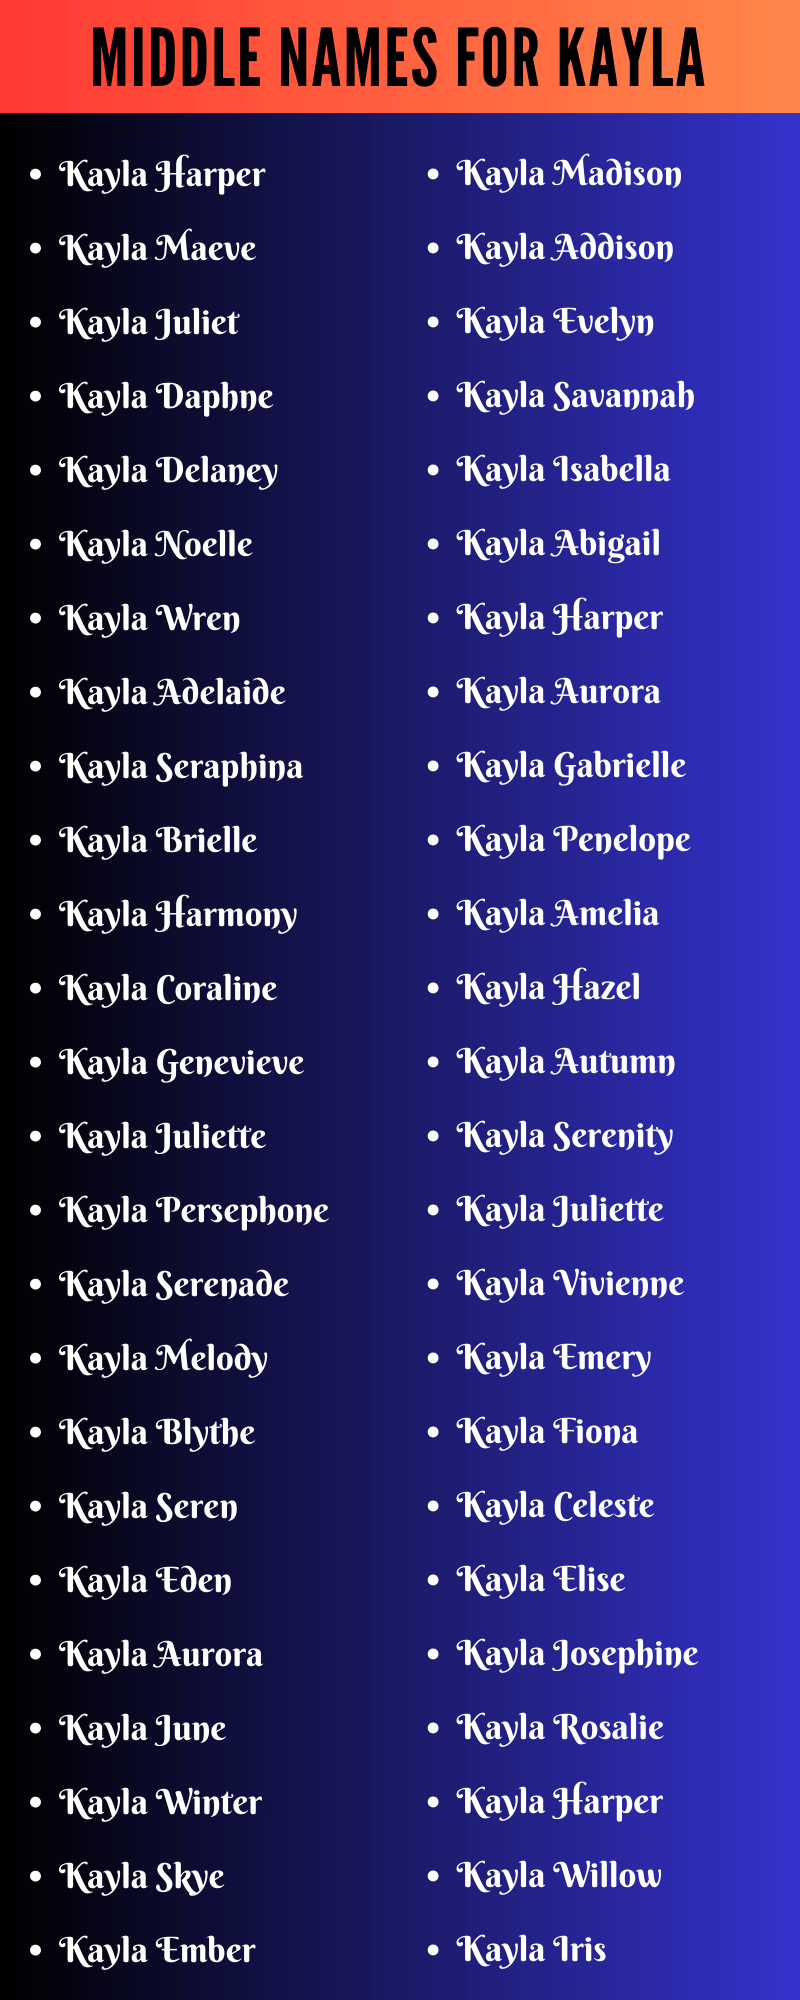 Middle Names For Kayla